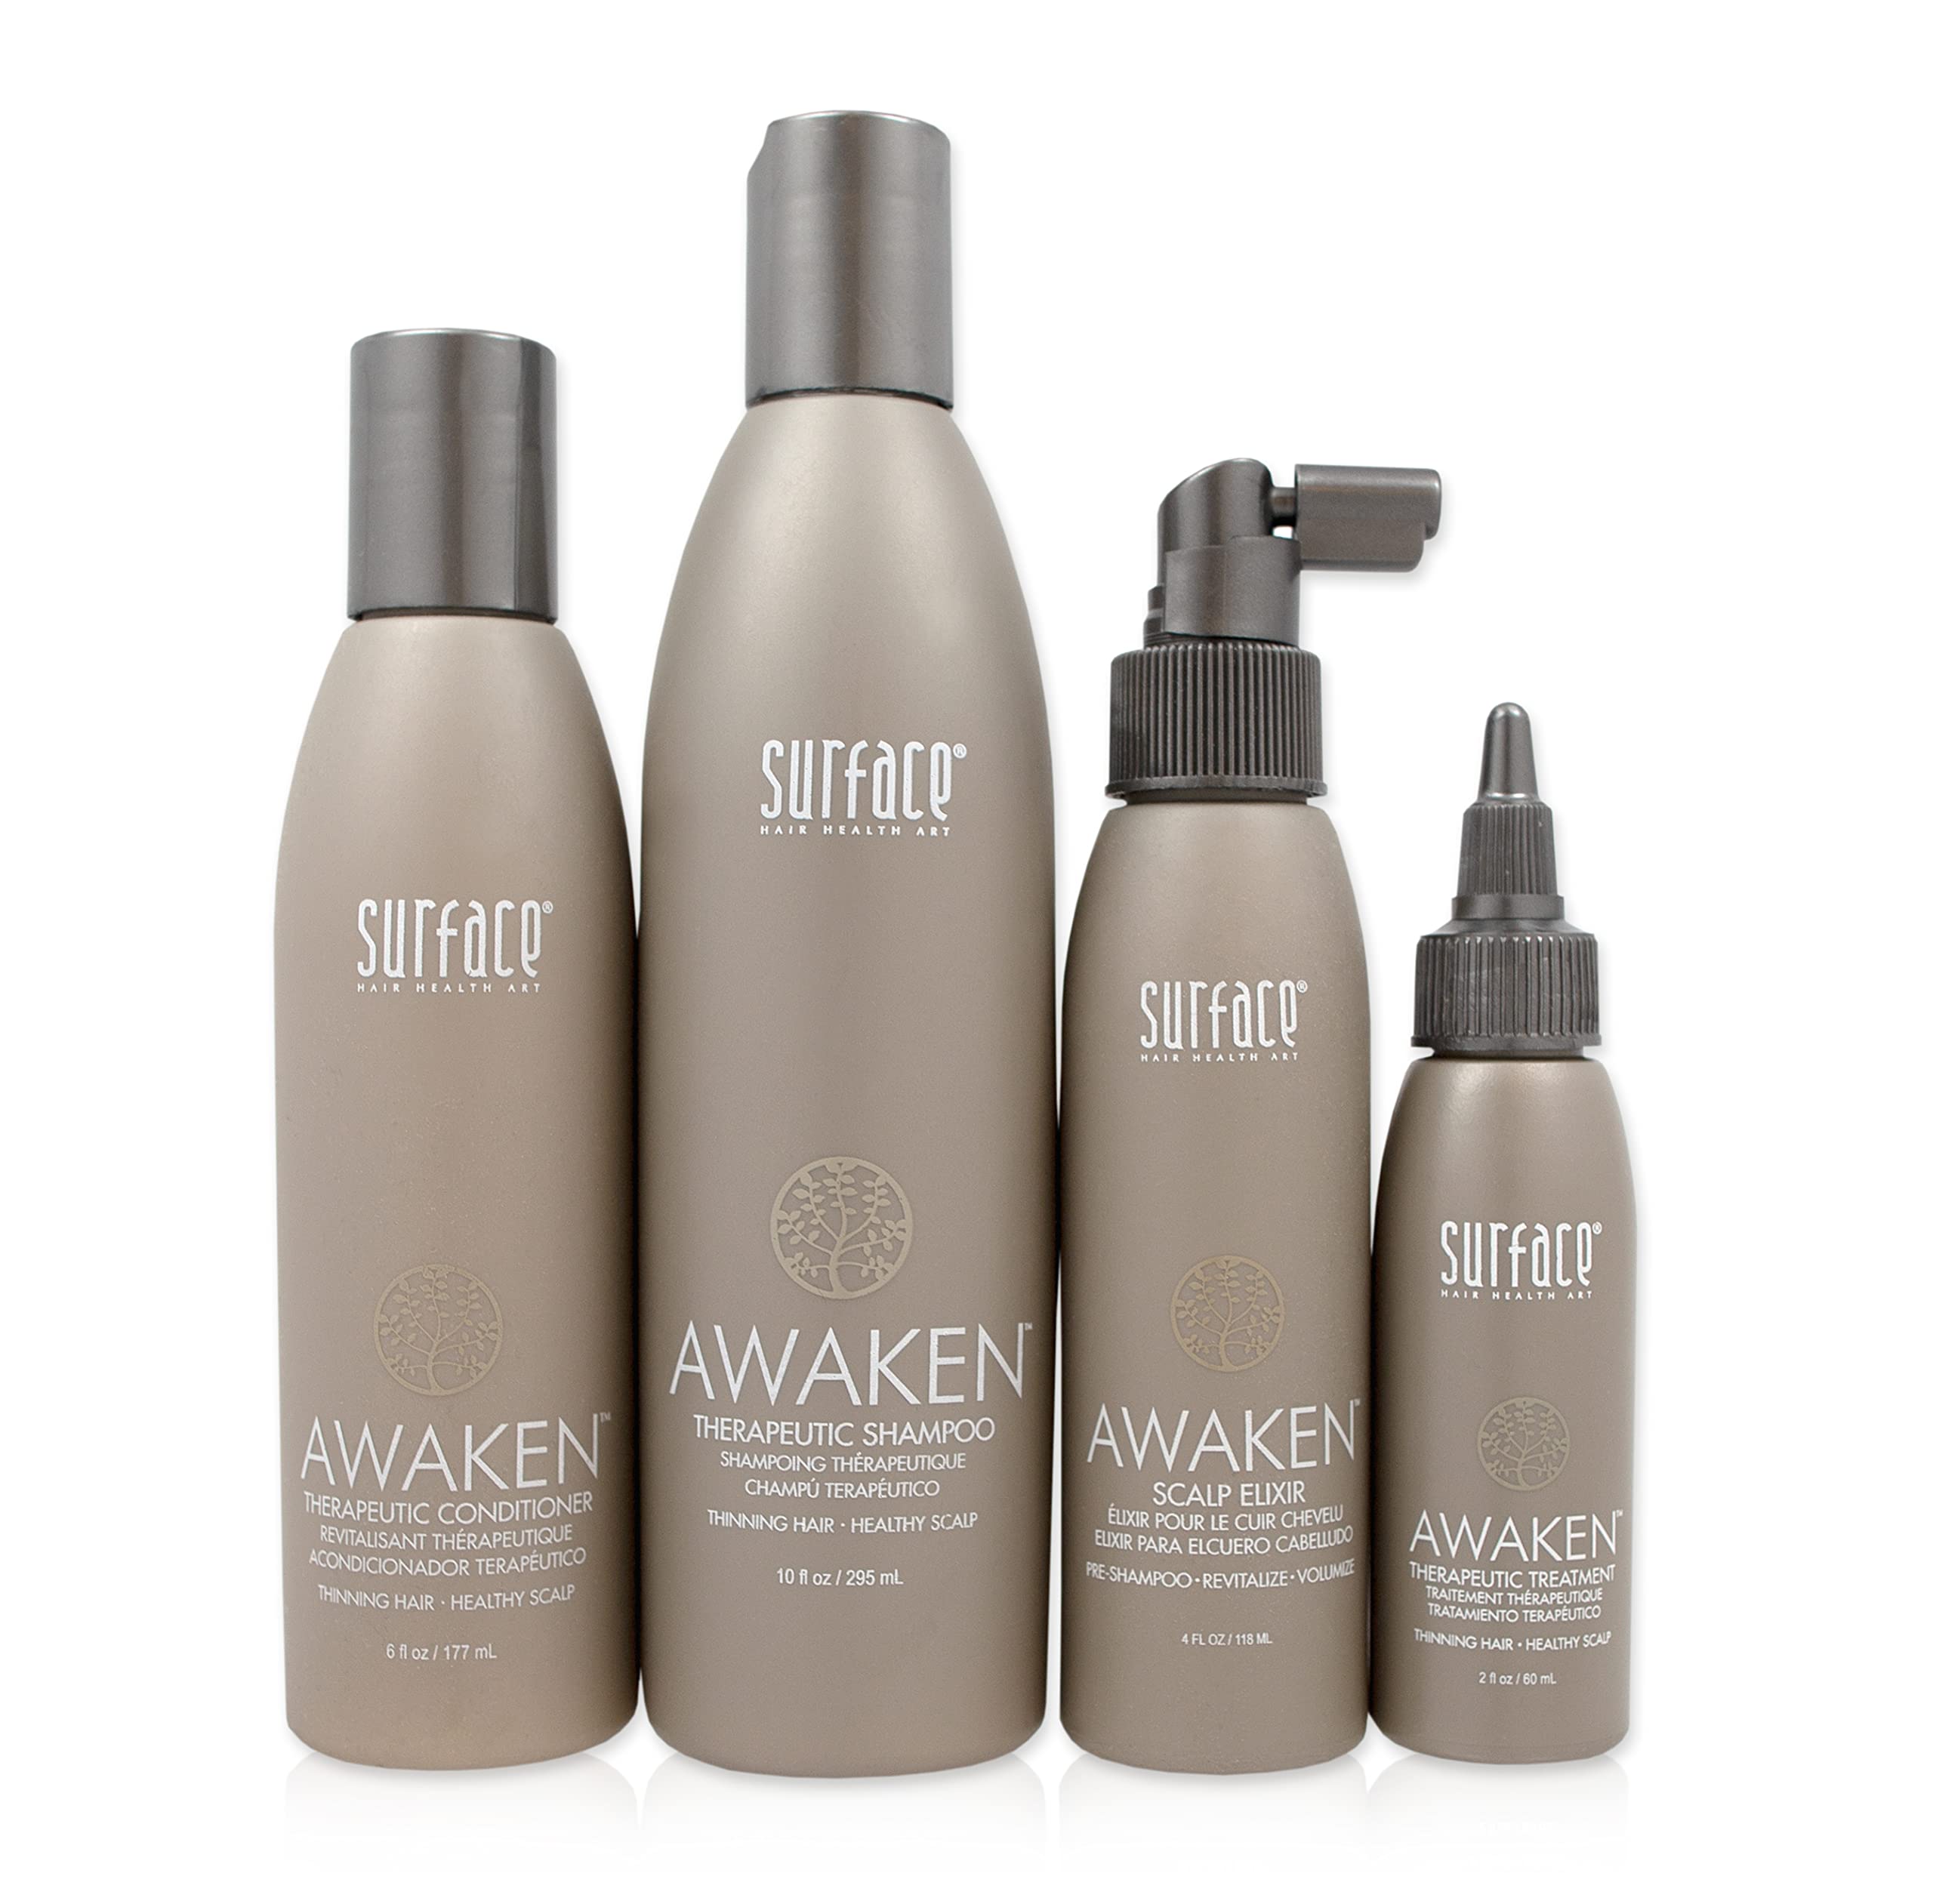 Surface Hair Awaken Kit: Shampoo, Conditioner, Scalp Elixir and Therapeutic Treatment - for Thinning Hair, Hair Loss and Thickening